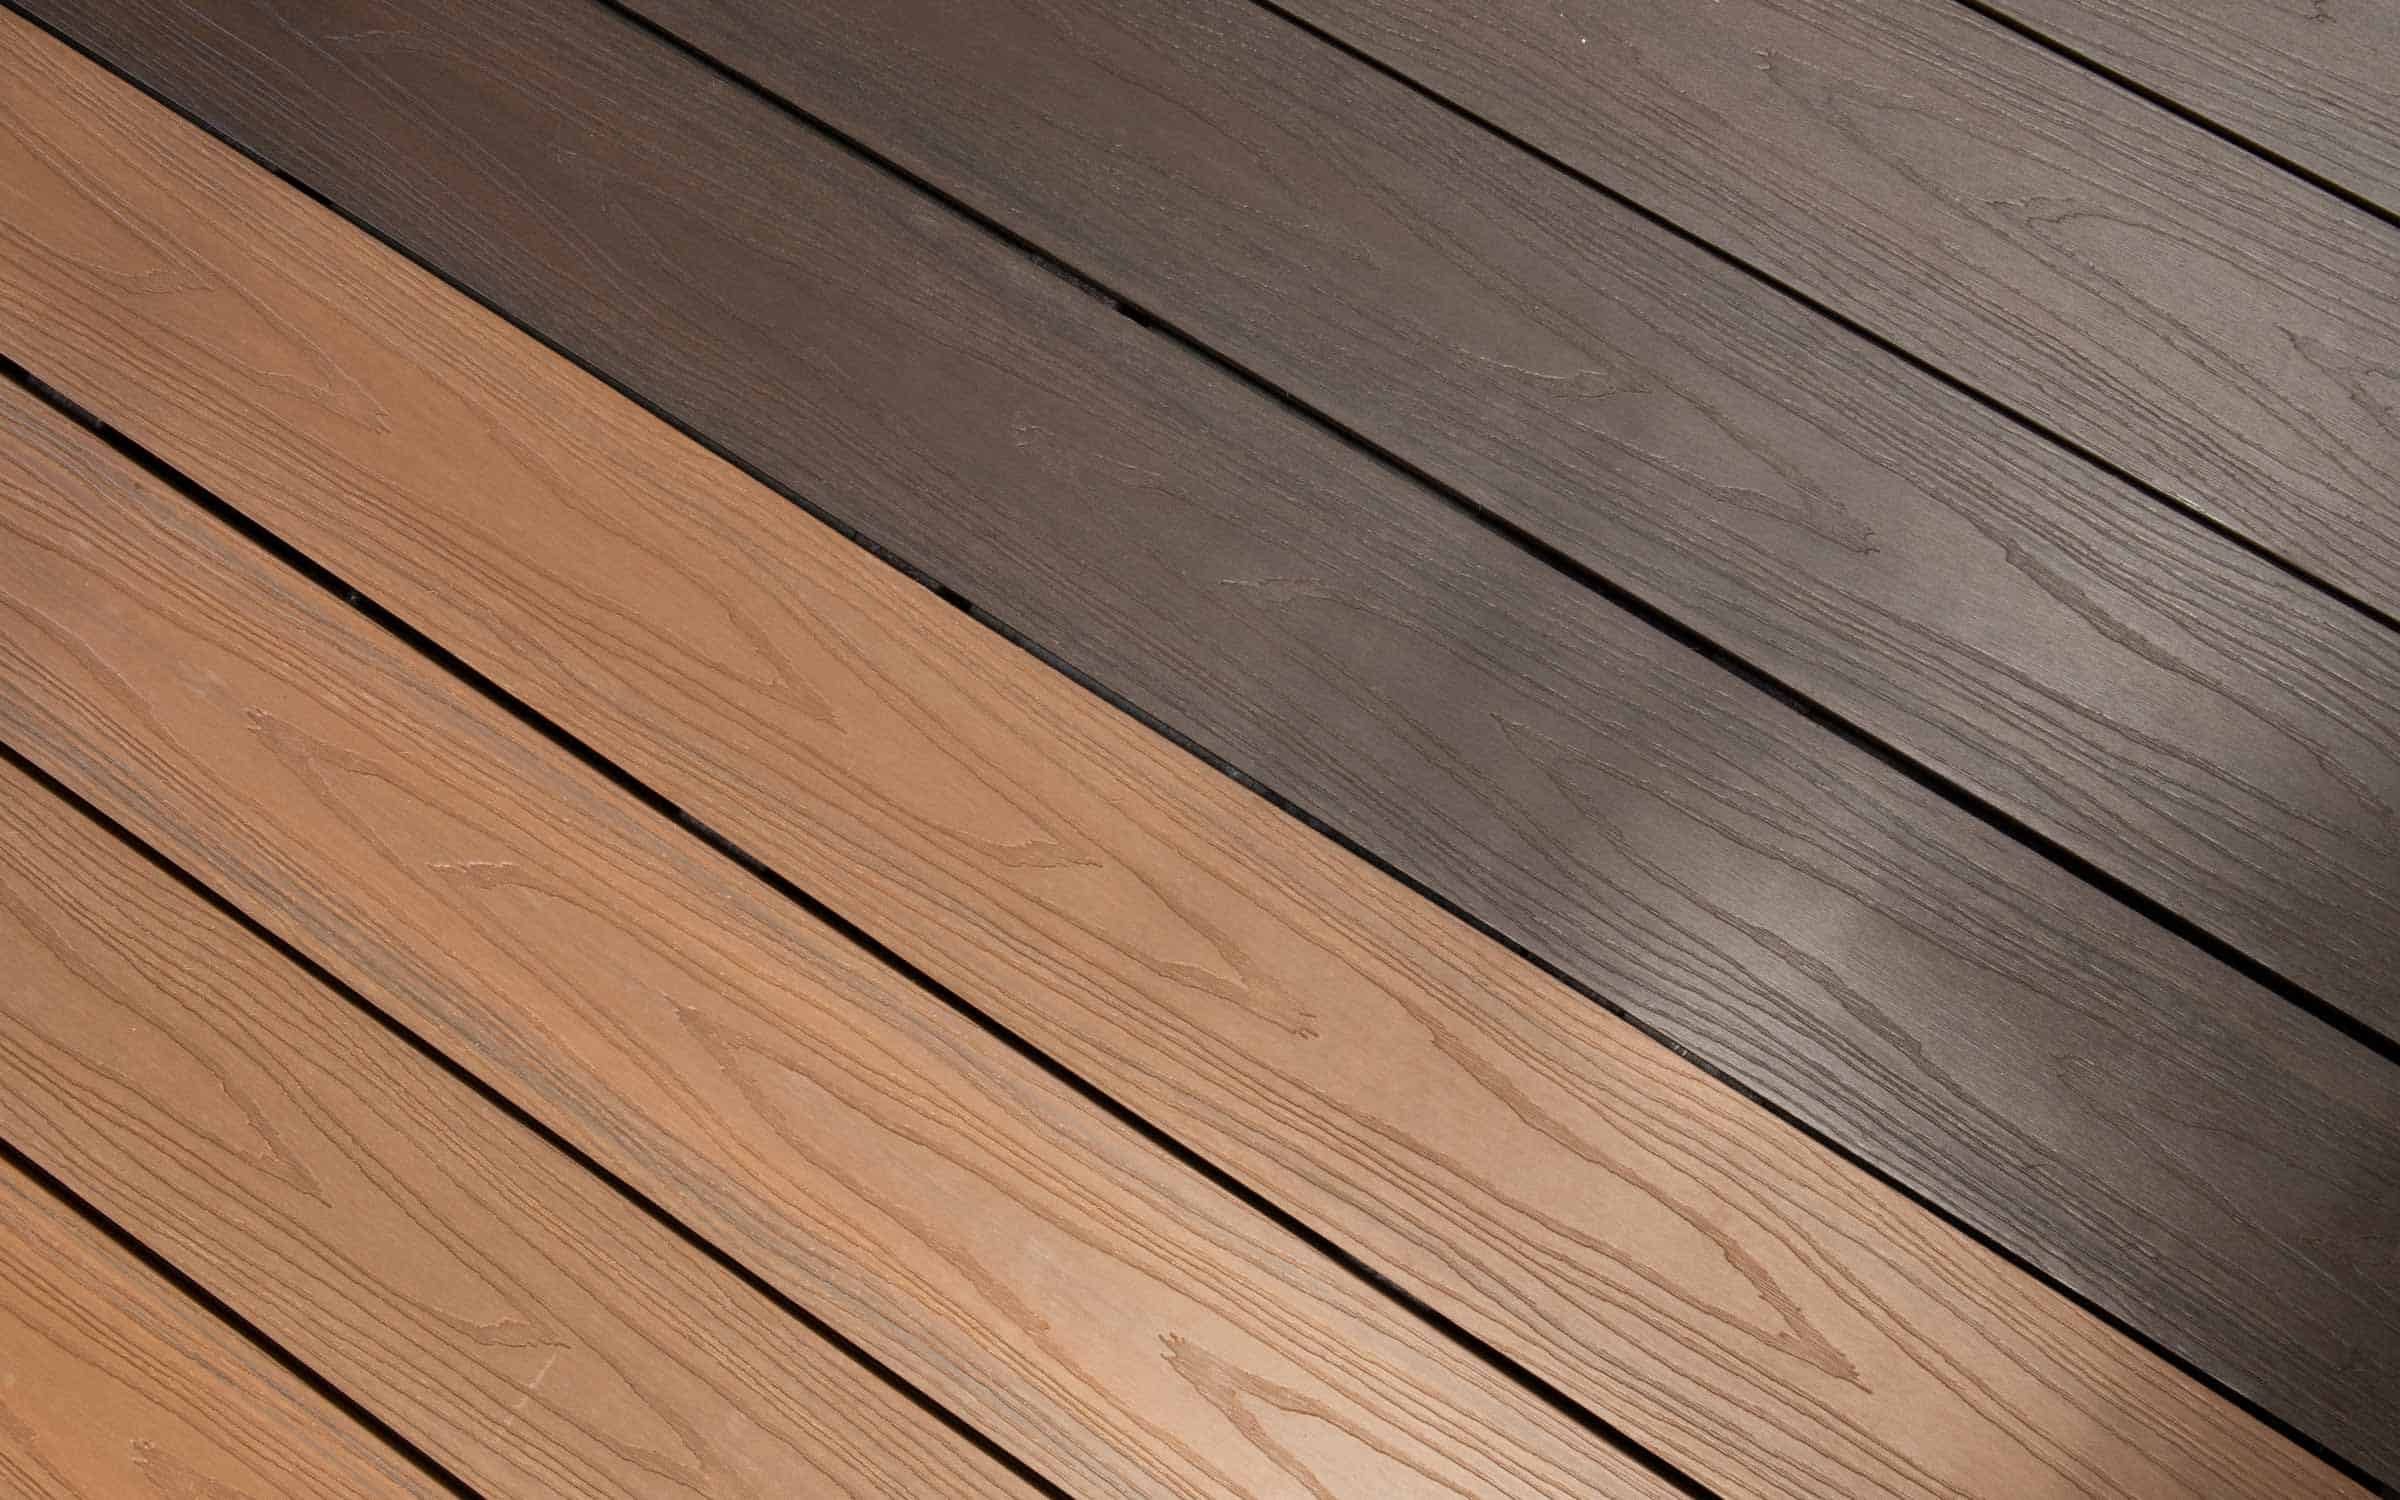 What Color Composite Decking Is Best